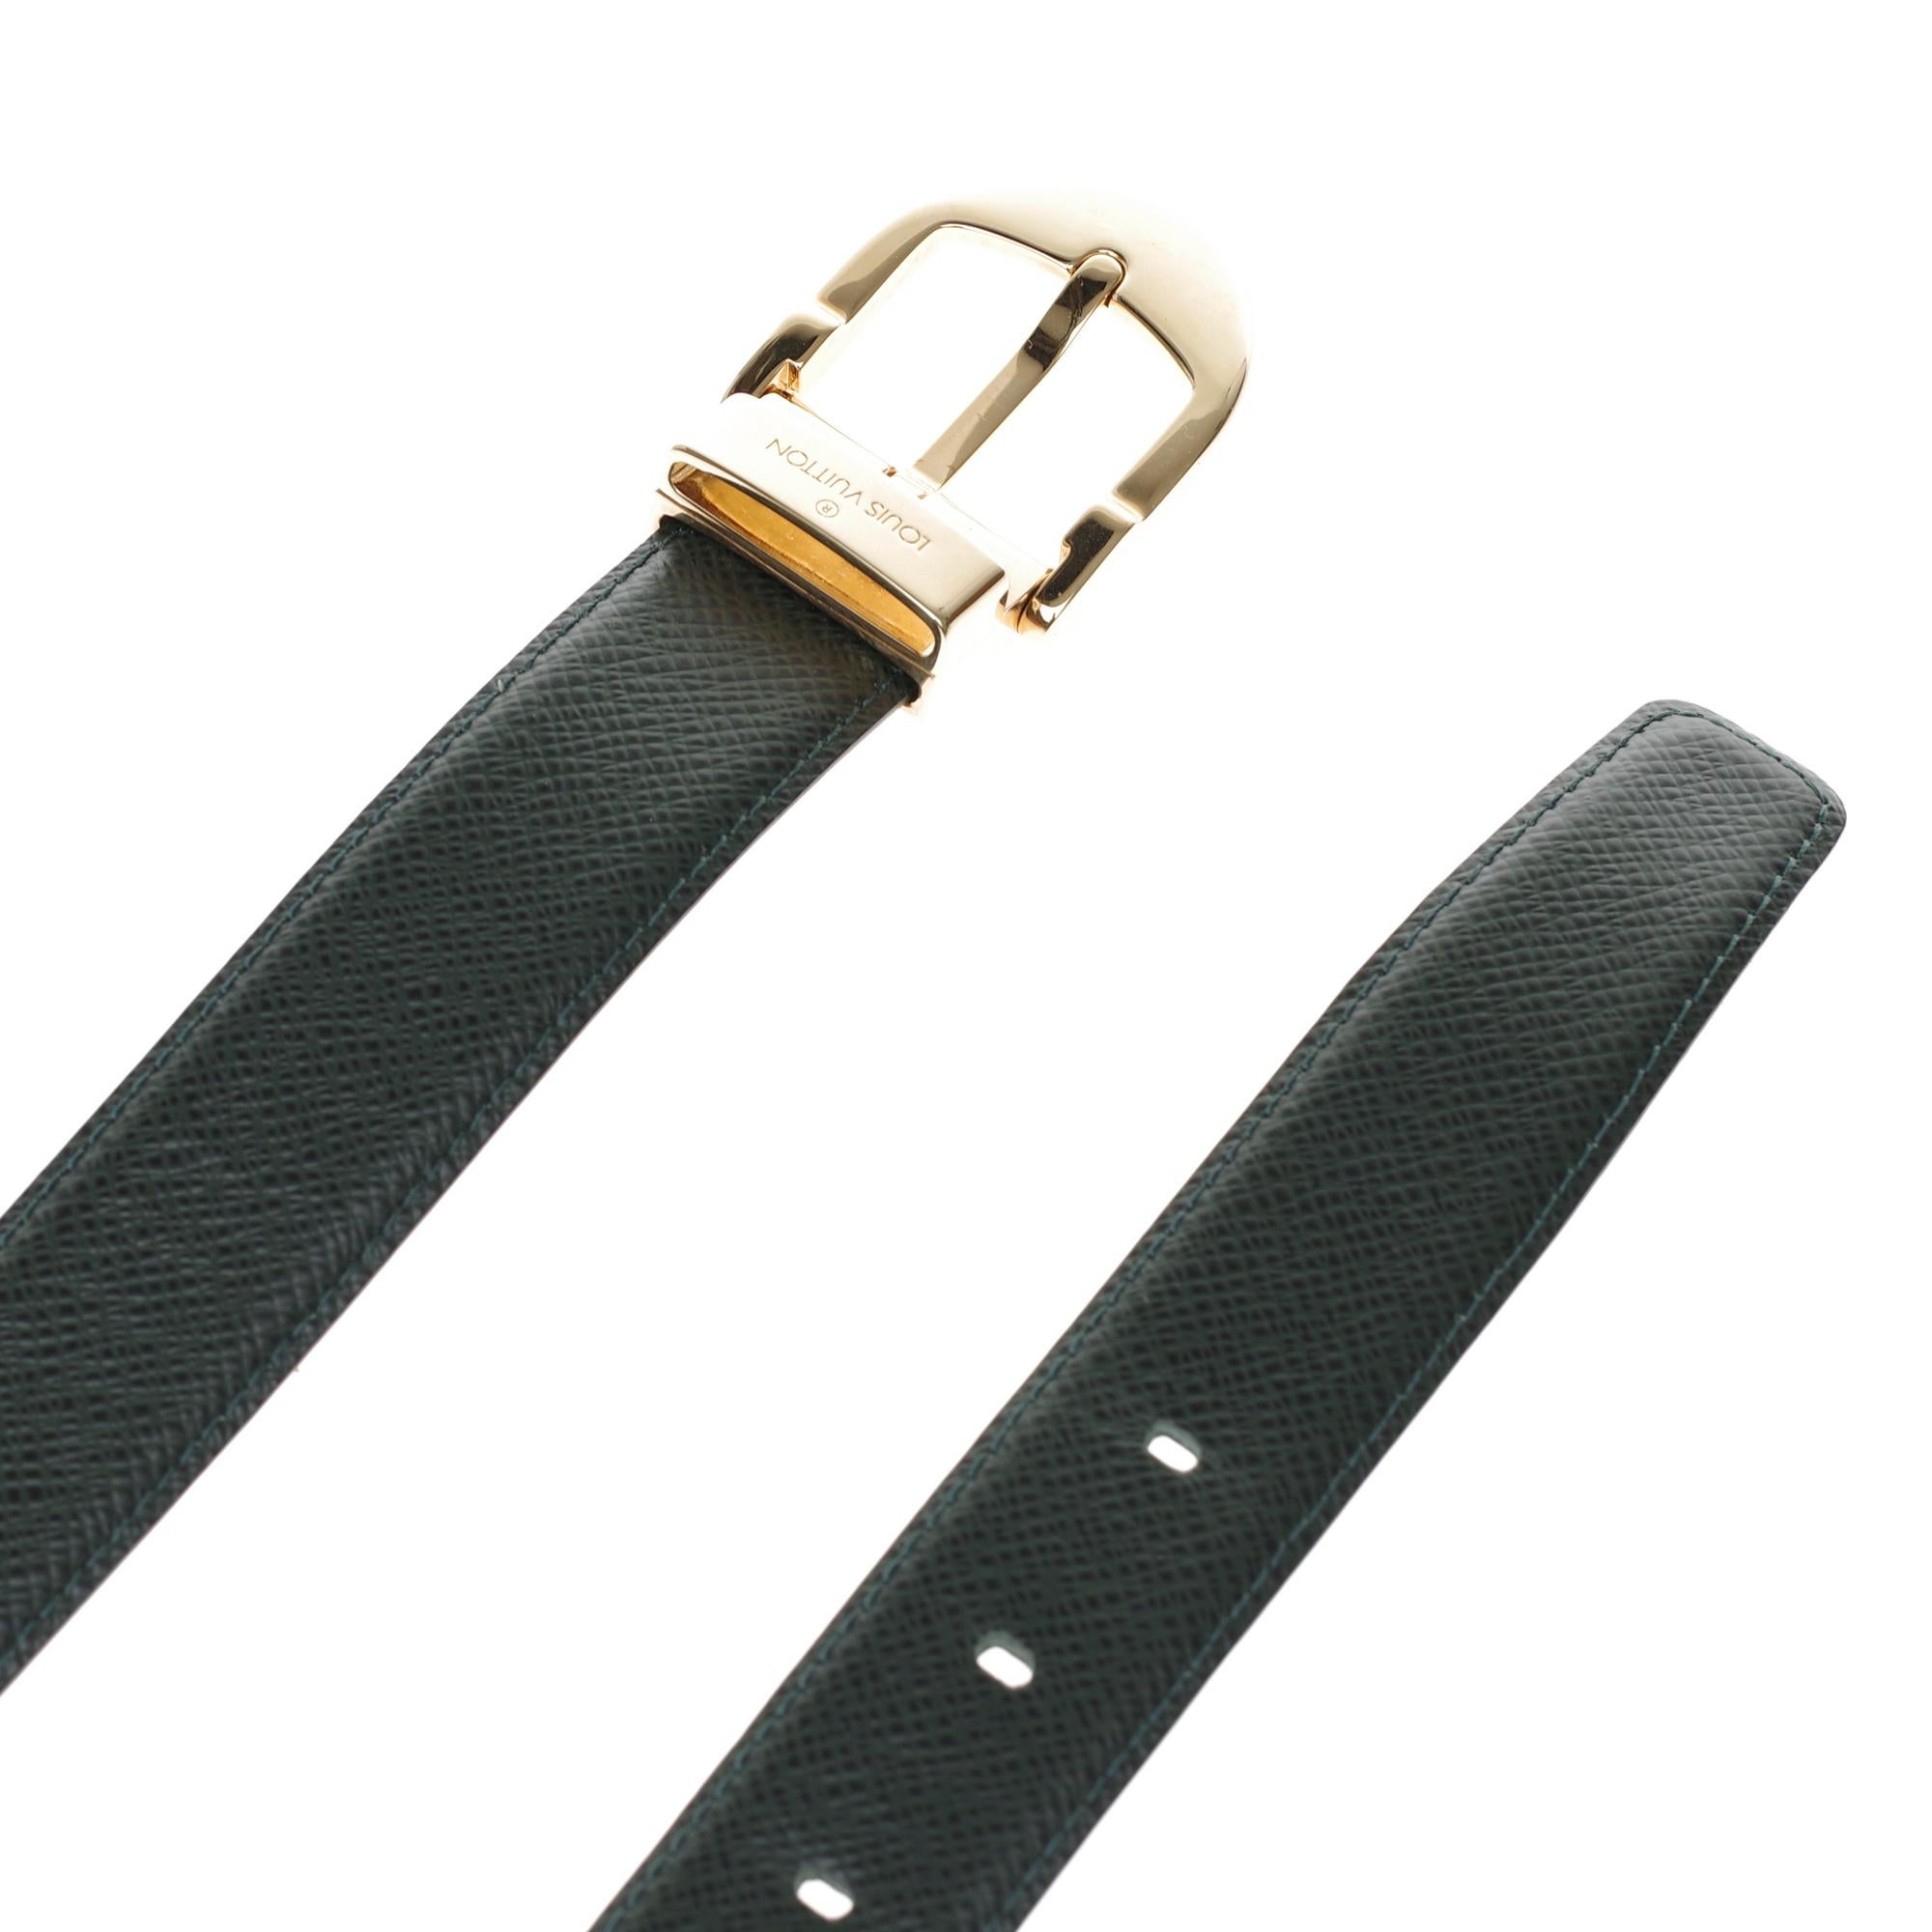 Superb Louis Vuitton belt in green Taiga leather, gold metal buckle.
Length: 80 cm.
Width: 3,2 cm.
Signature: Louis Vuitton Paris, Made in France.
In very good general condition despite minor signs of wear.